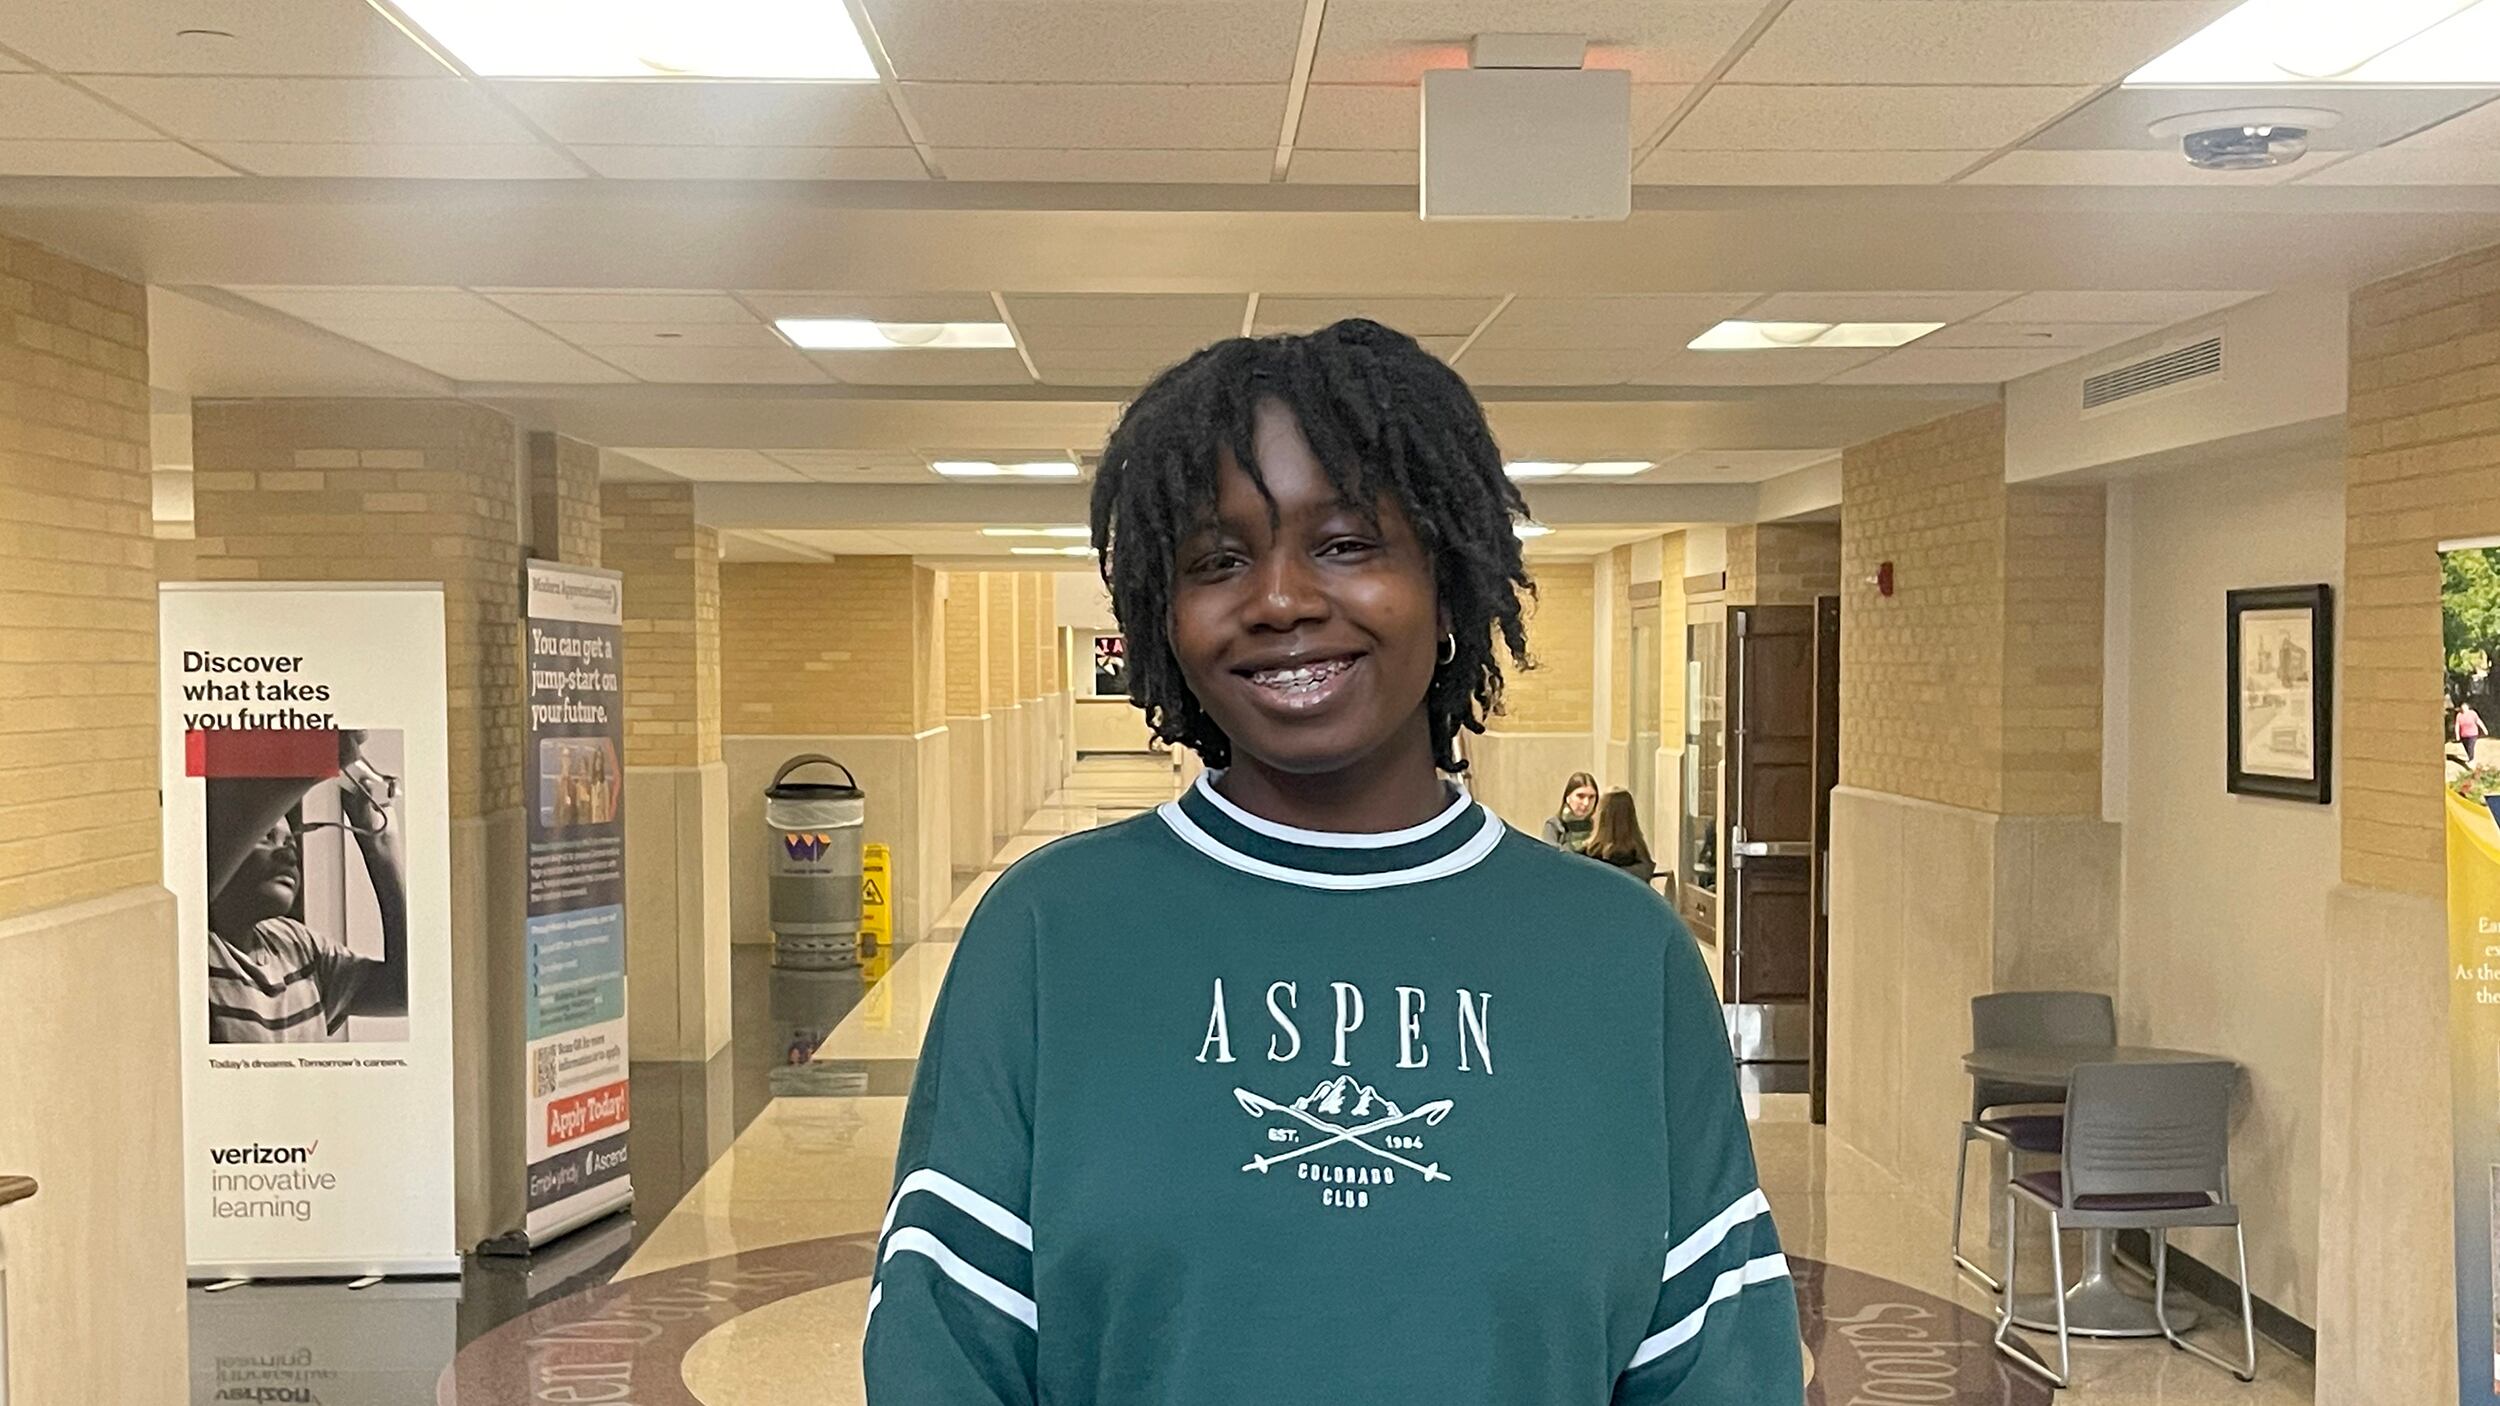 A young person stands in the center of a school hallway wearing a green sweater with the word "Aspen" on it.